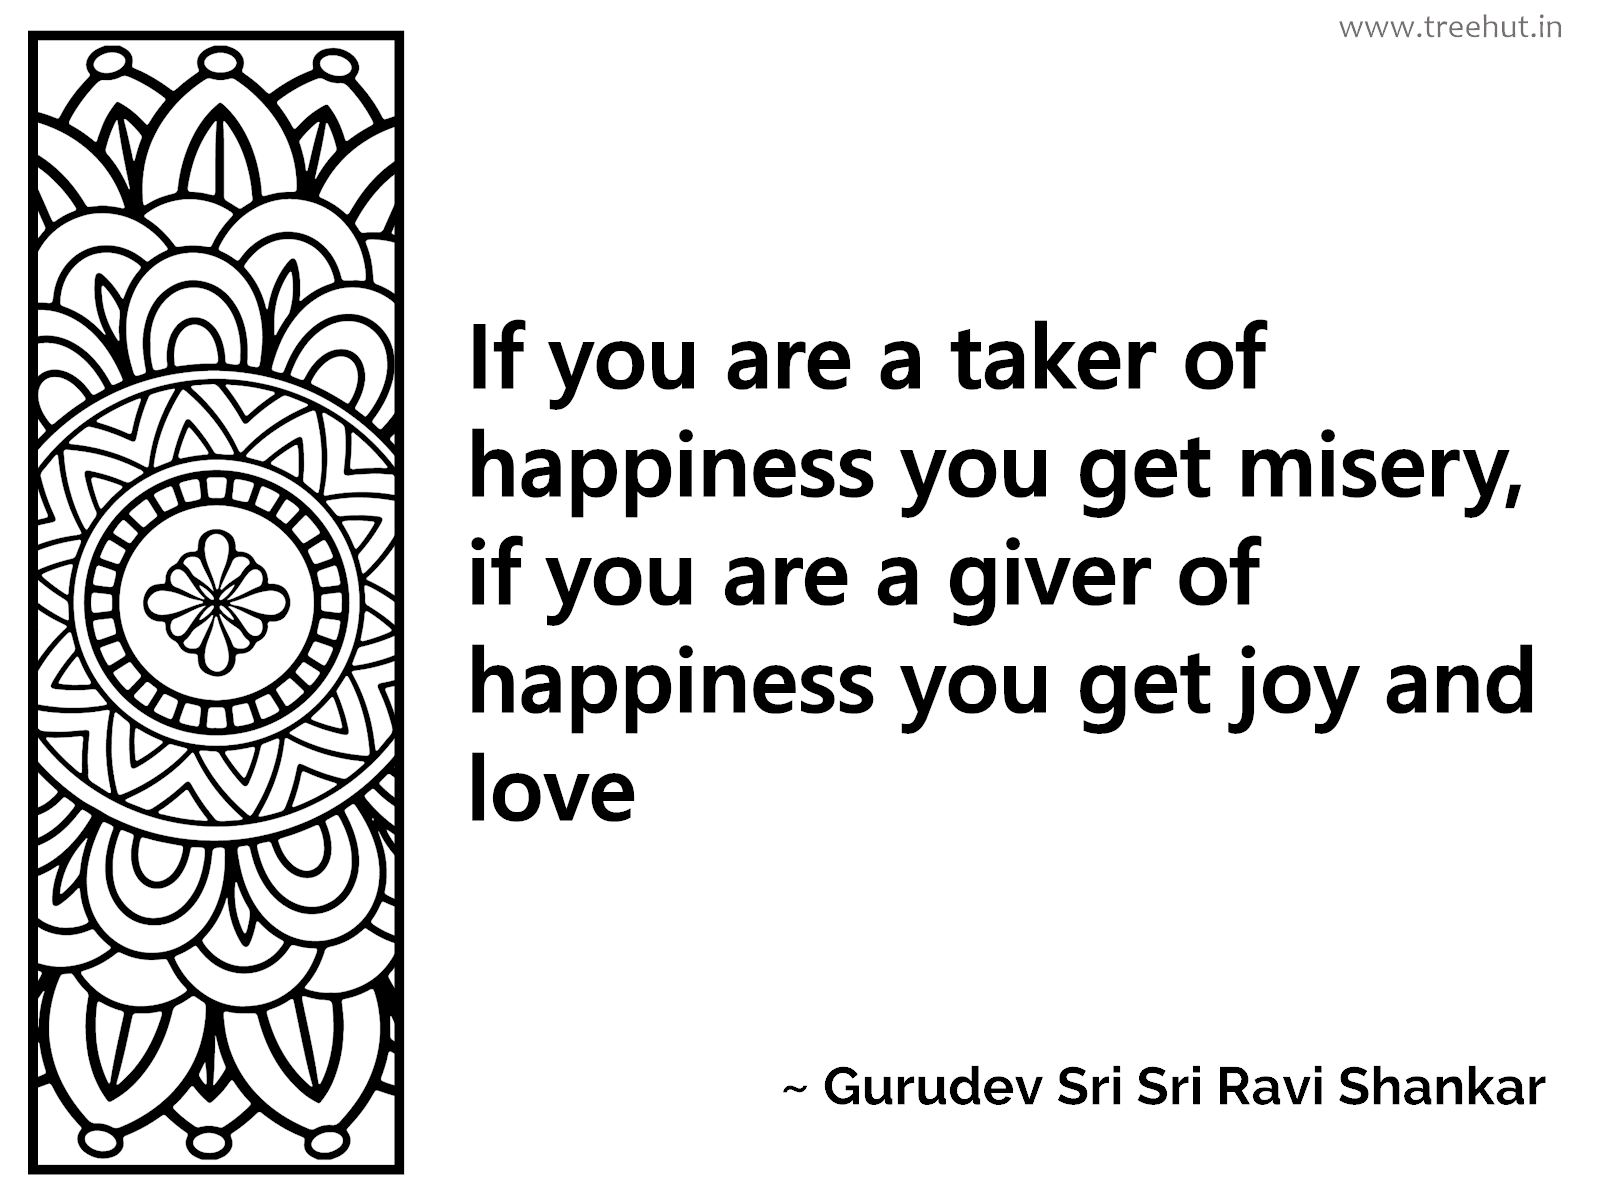 If you are a taker of happiness you get misery, if you are a giver of happiness you get joy and love Inspirational Quote by Gurudev Sri Sri Ravi Shankar, coloring pages